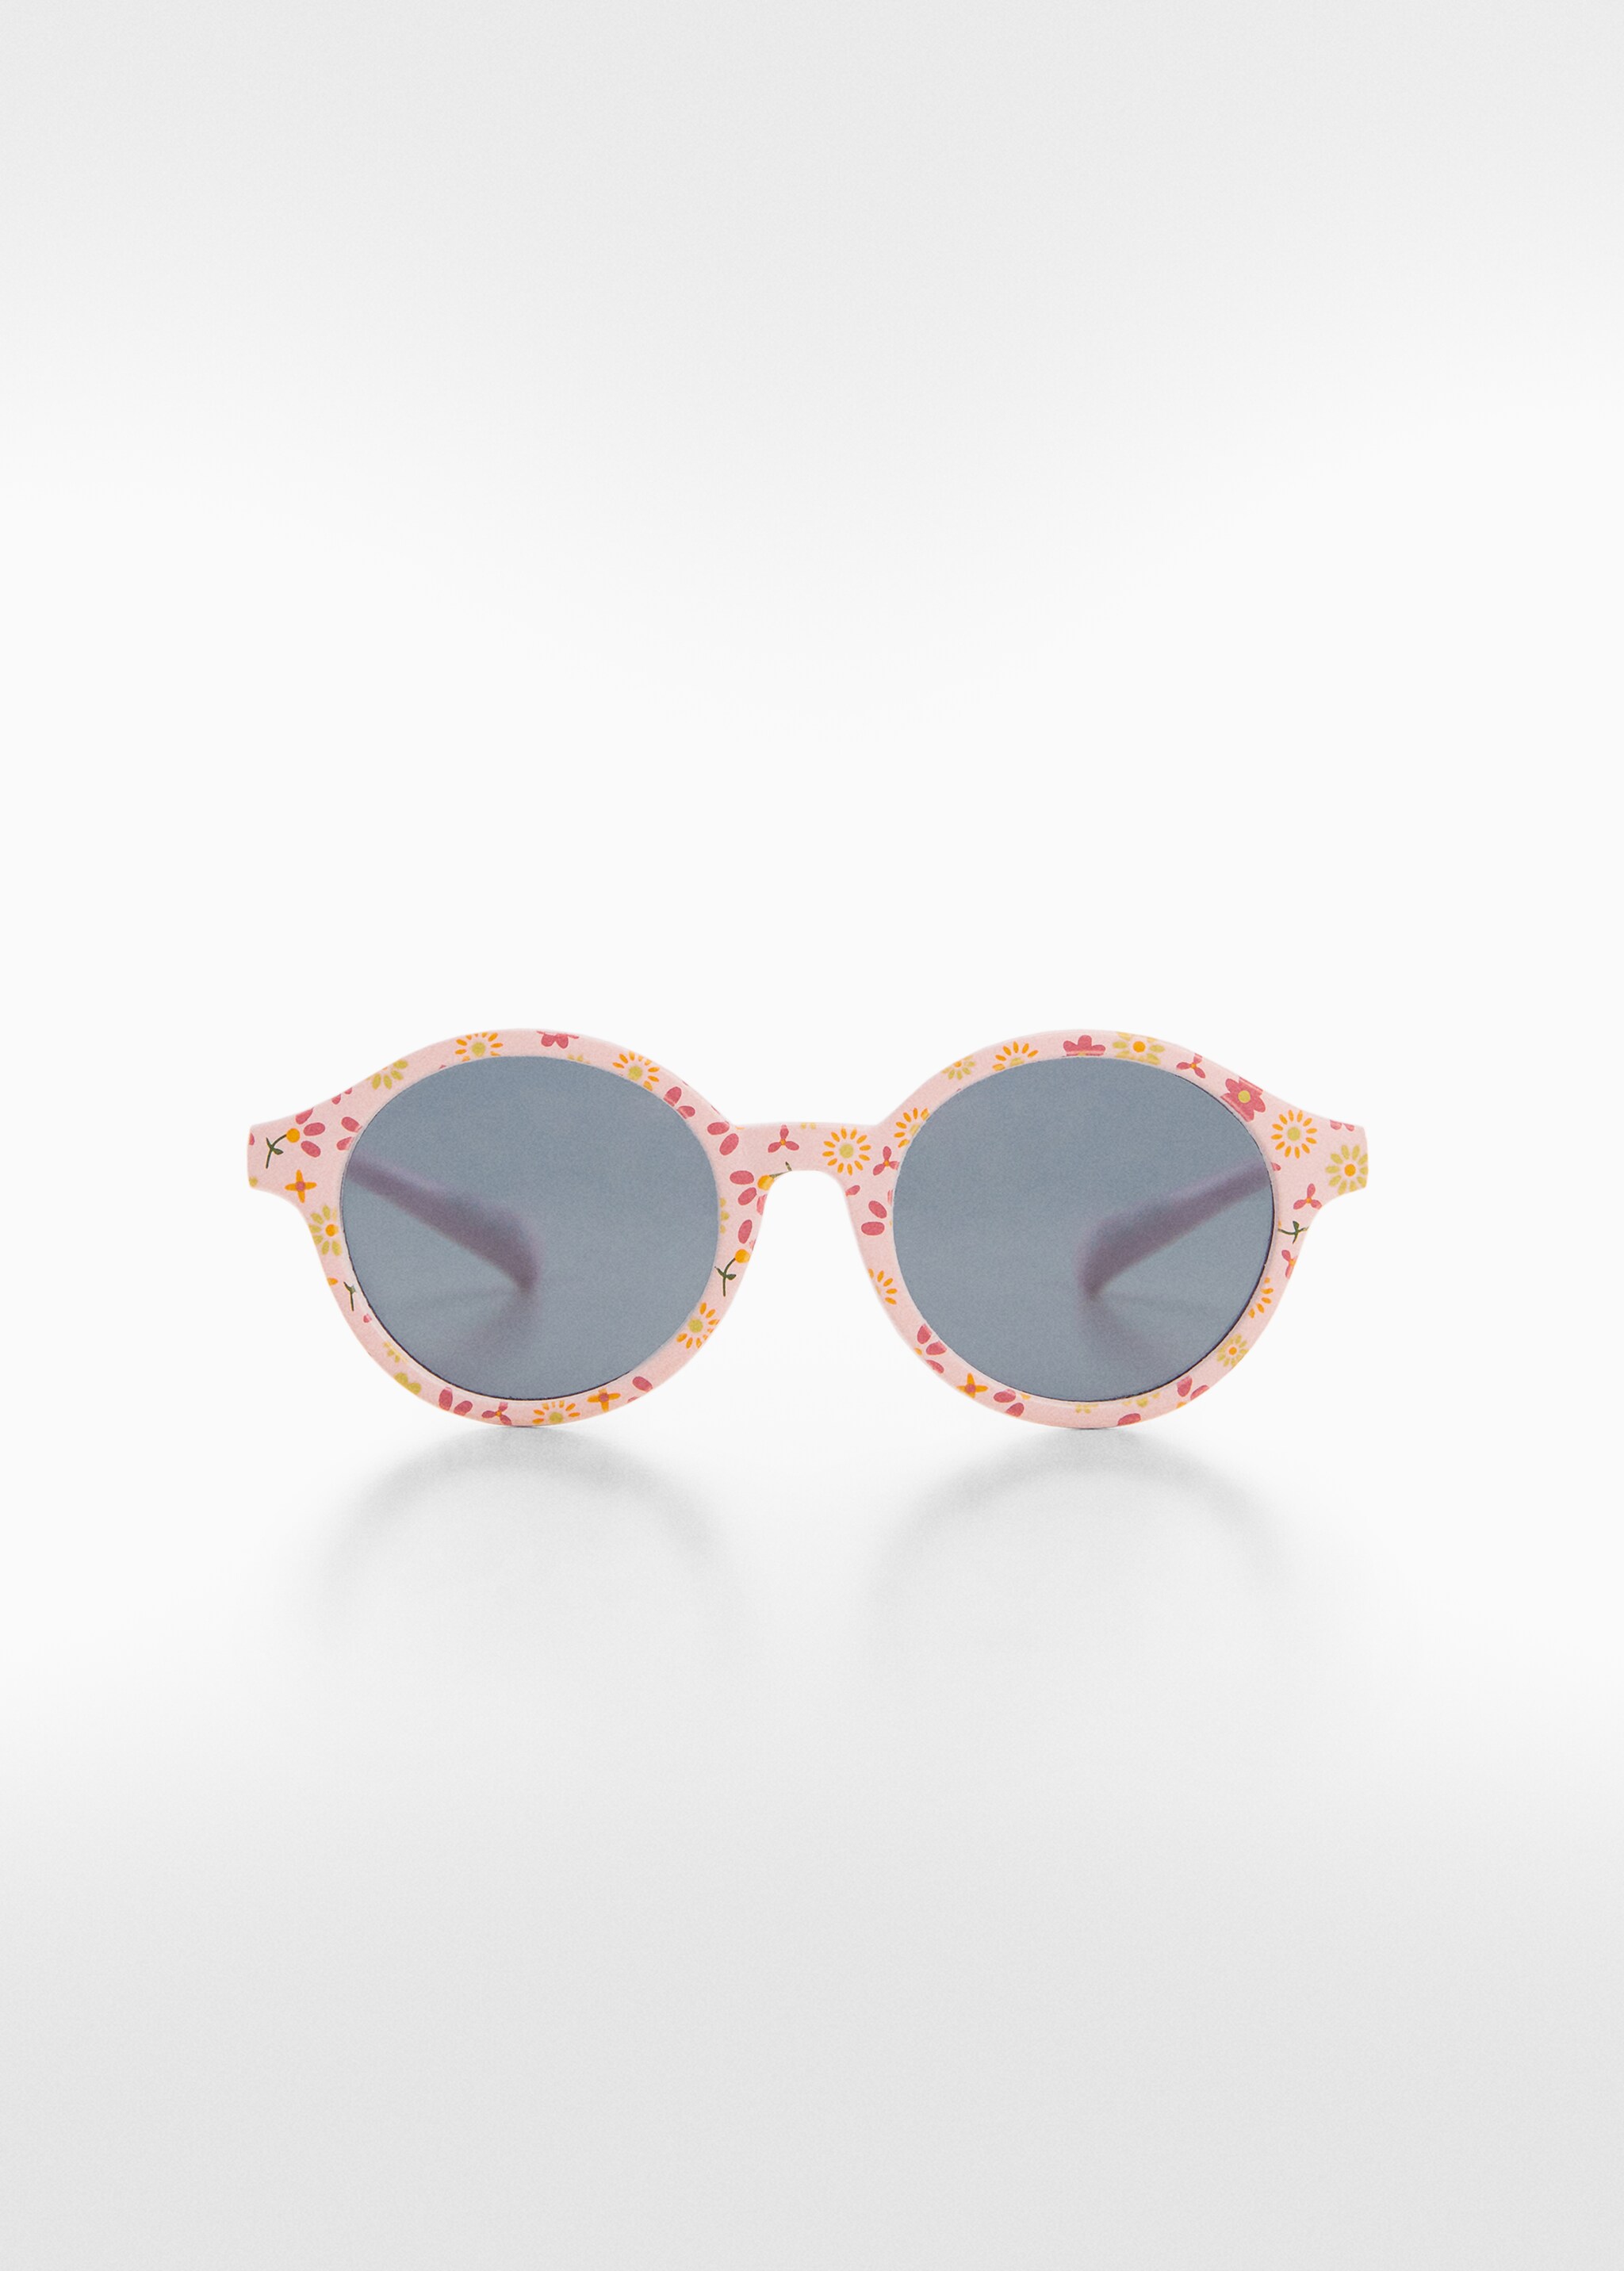 Printed frame sunglasses - Article without model